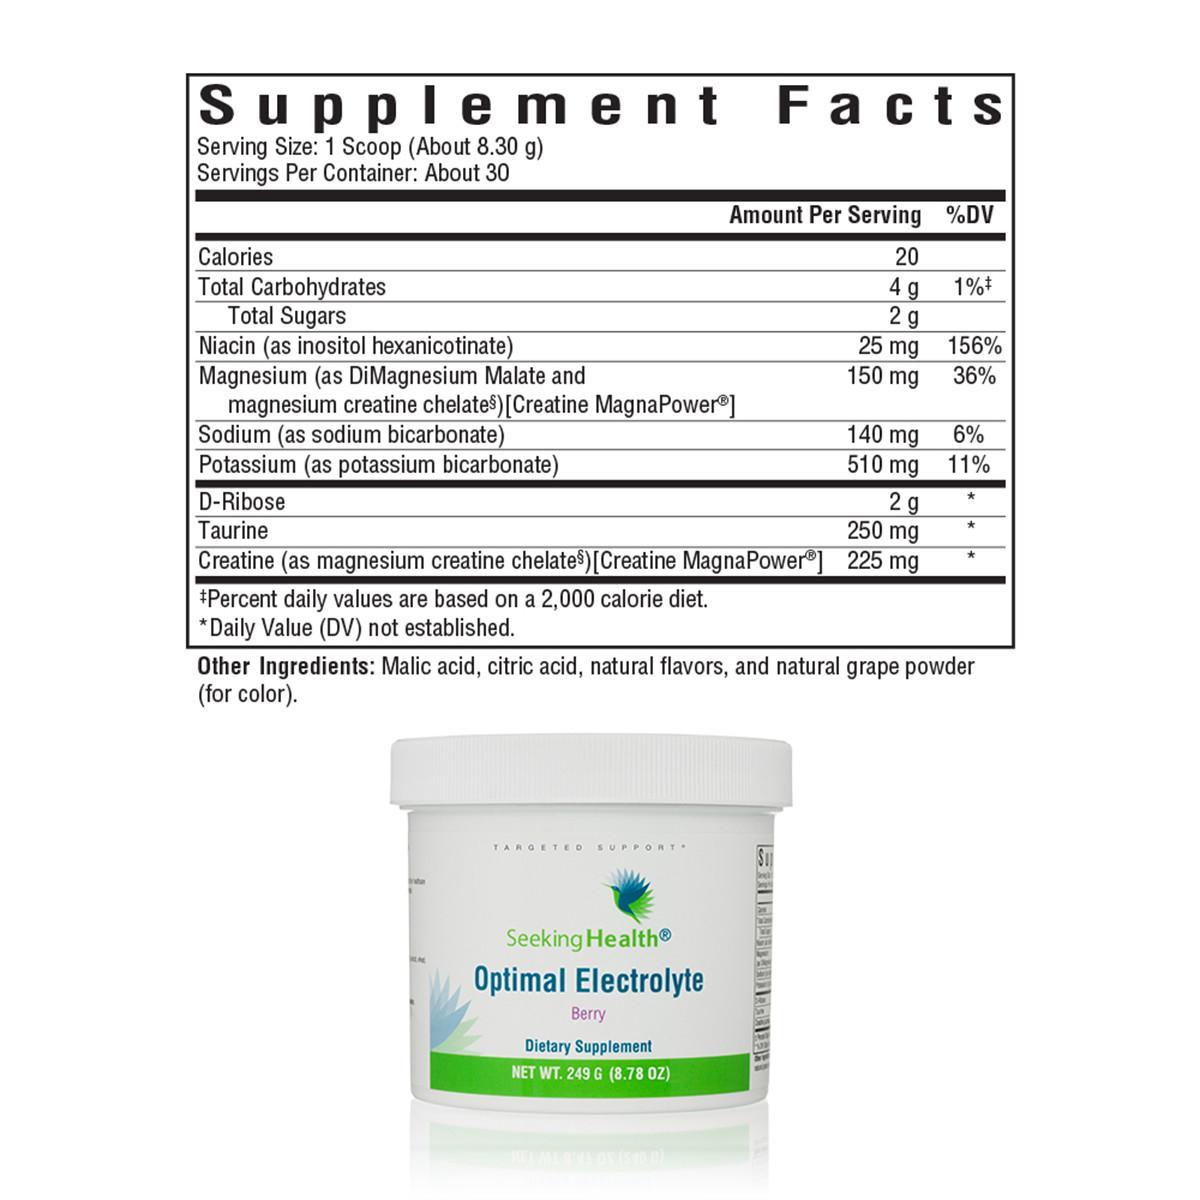 Optimal Electrolyte Berry Flavour by Seeking Health supplement facts and ingredients